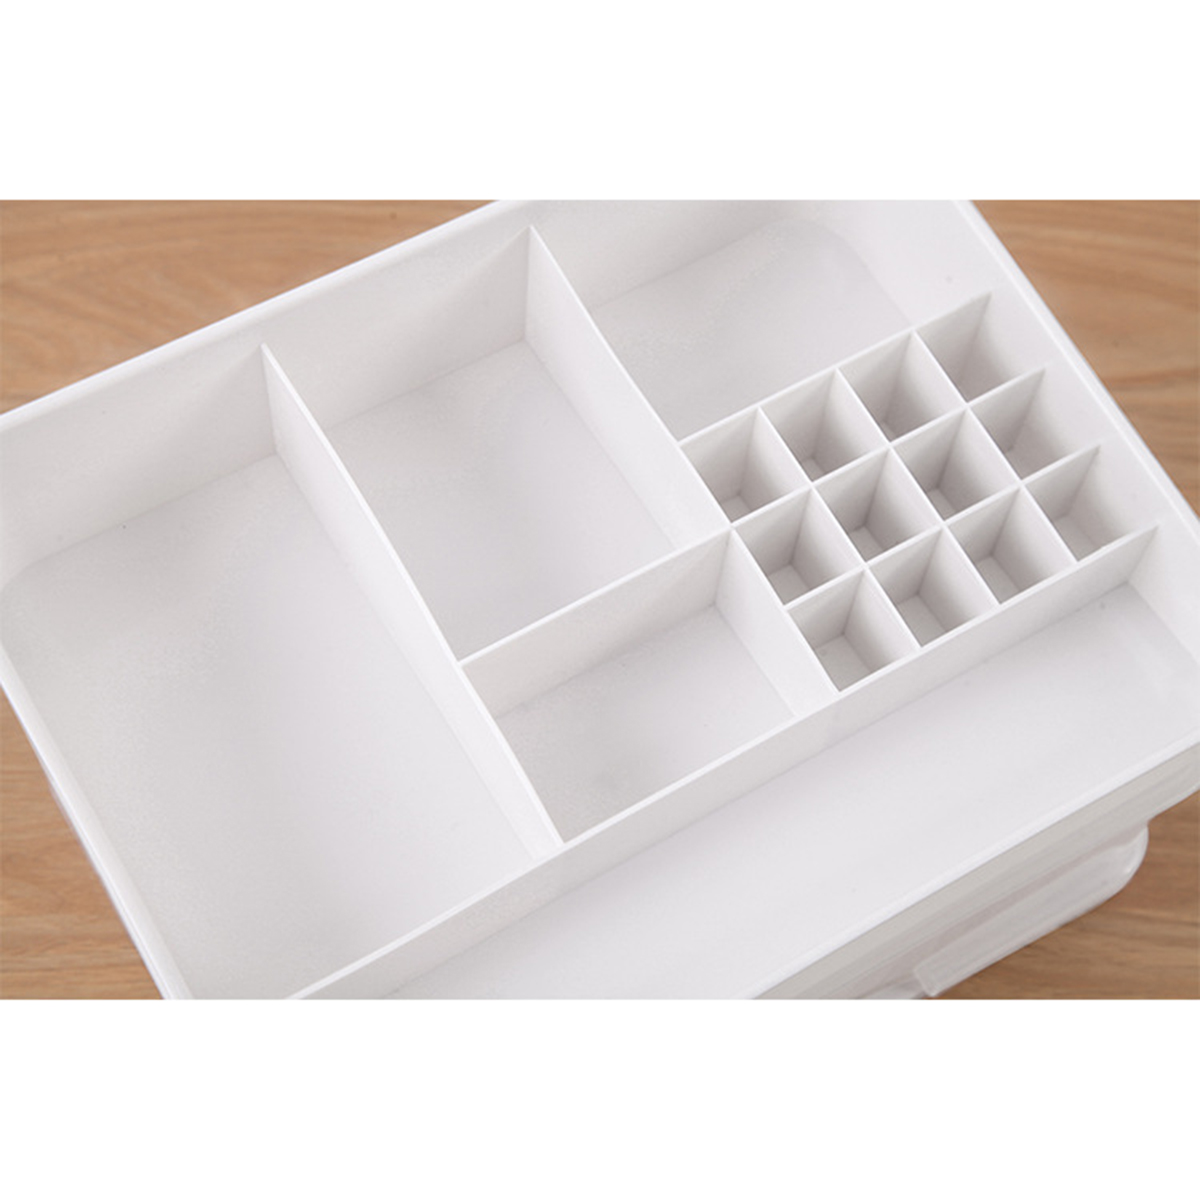 Plastic-Cosmetic-Drawer-Makeup-Organizer-Storage-Box-Container-Holder-Desktop-with-Drawer-1708816-11